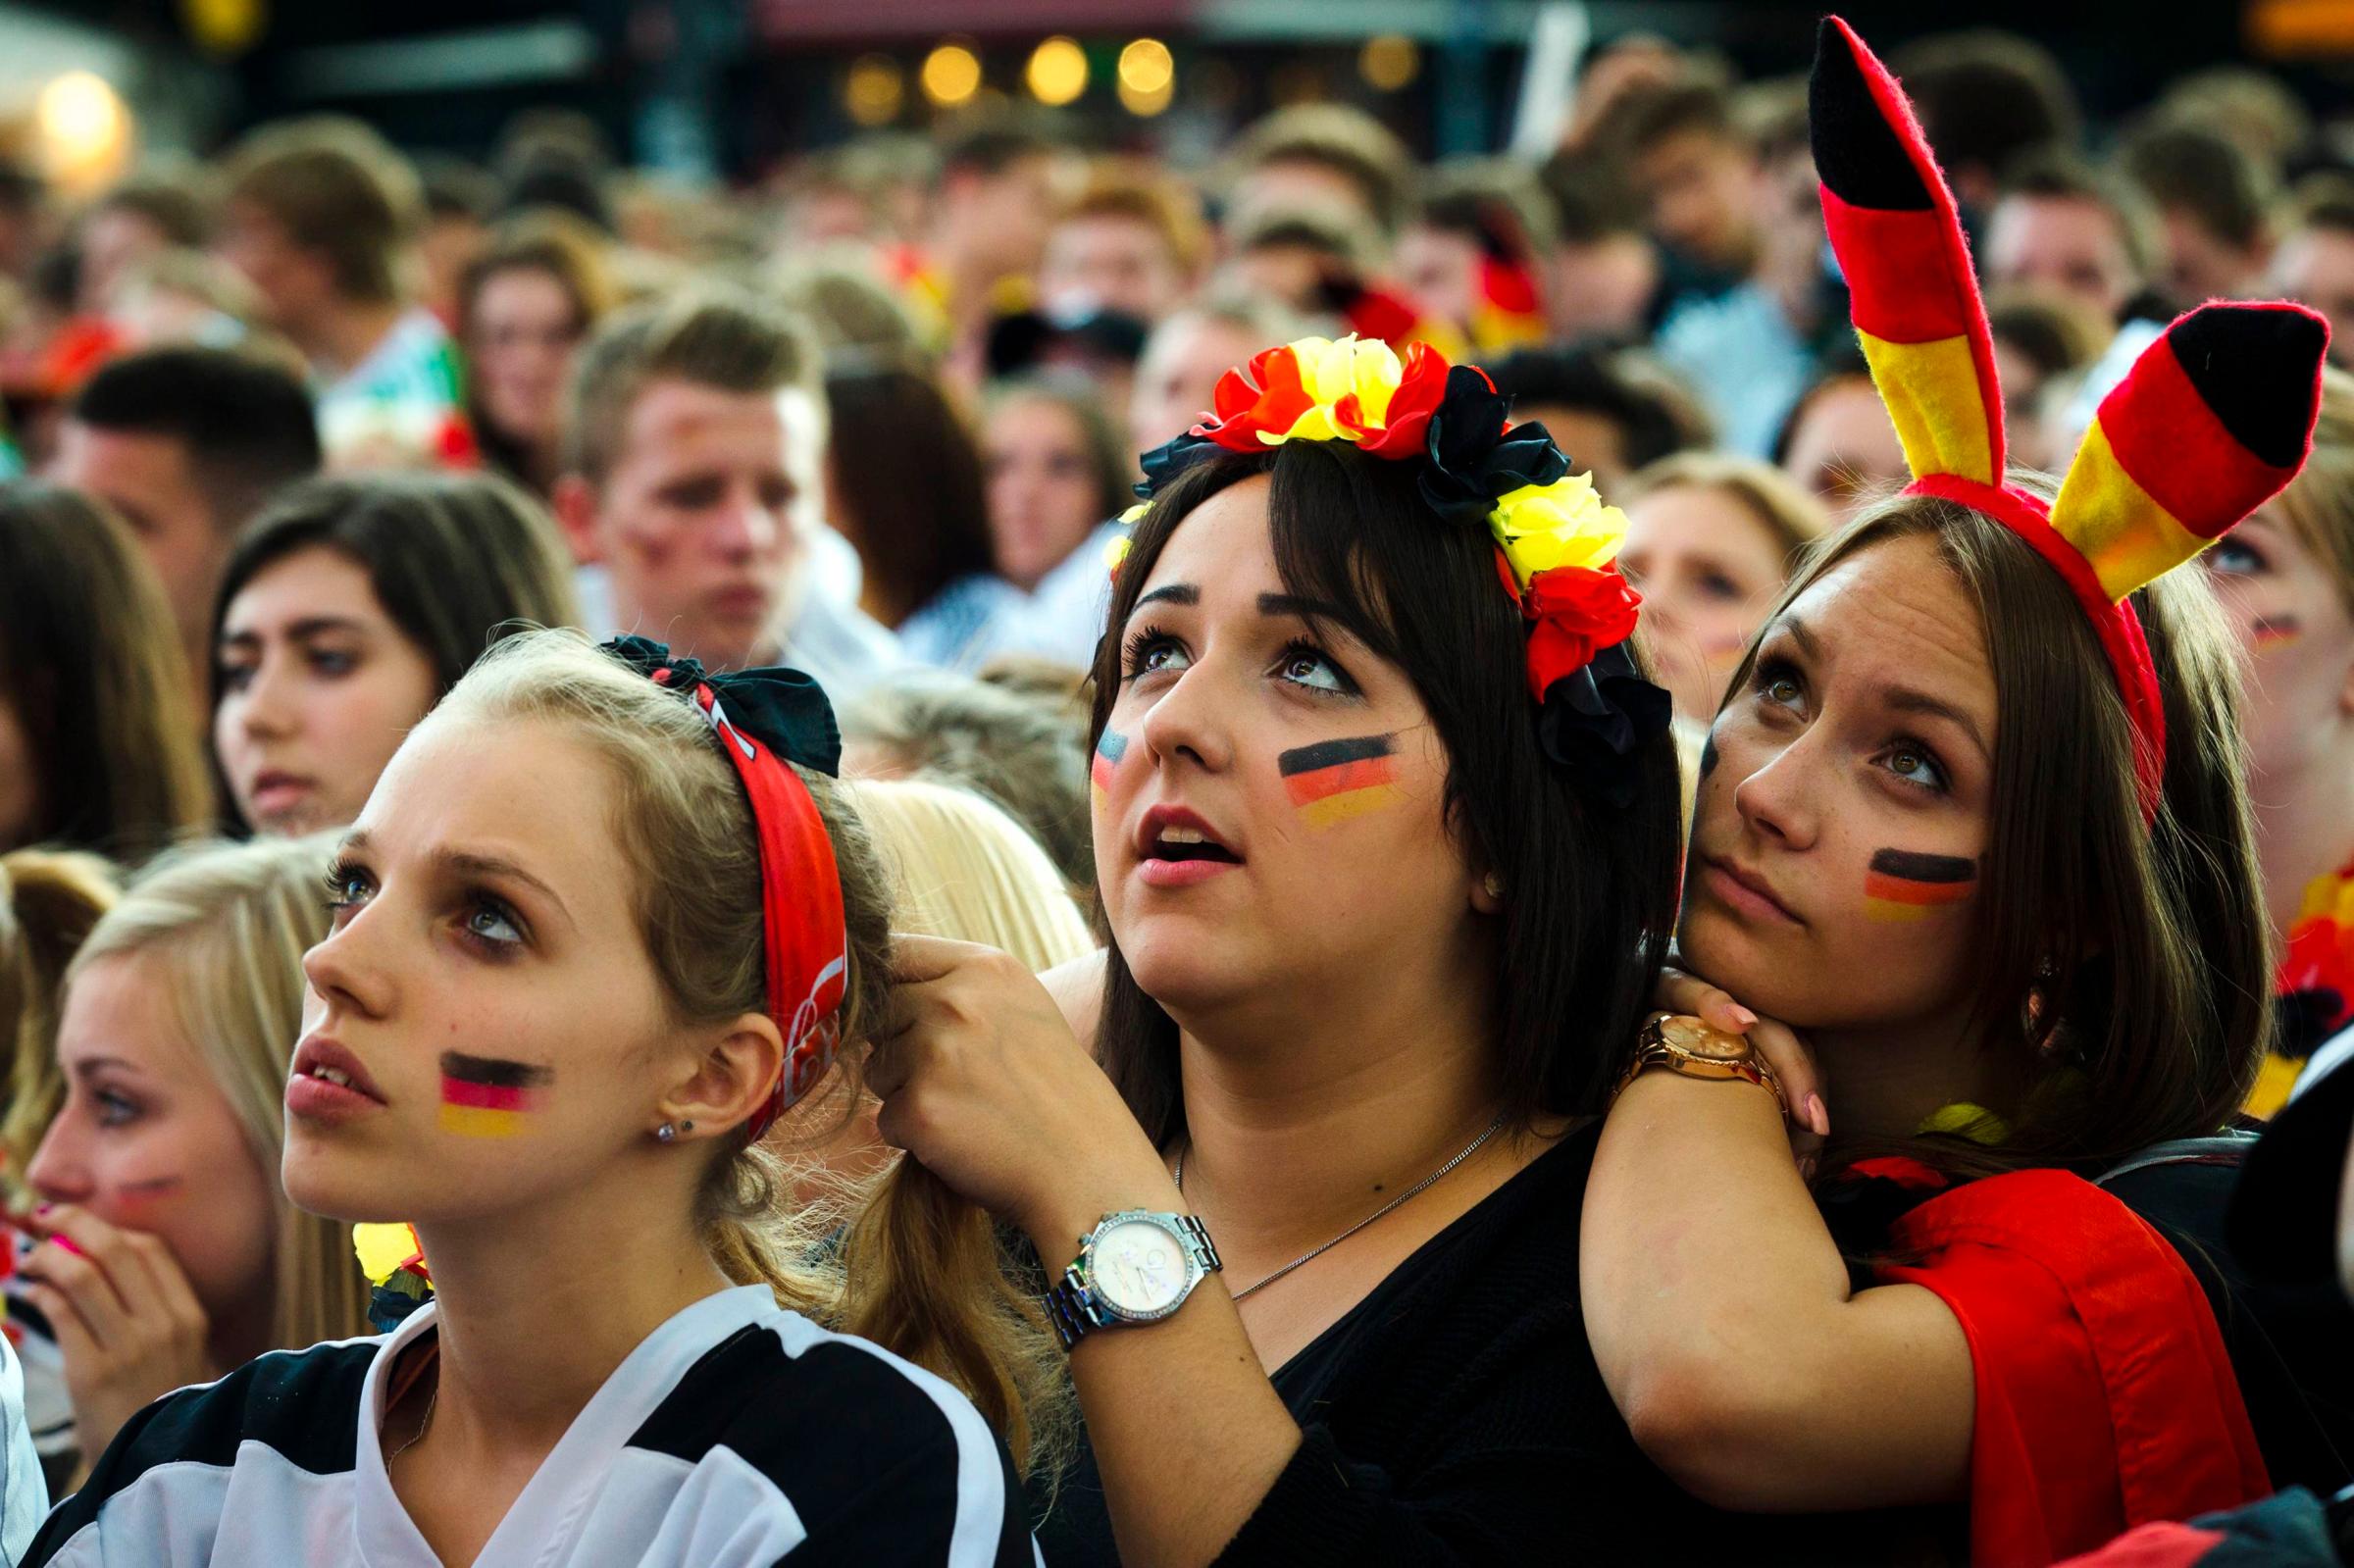 German fans watch as their team play against the U.S. at the Fanmeile public viewing arena in Berlin on June 26, 2014.